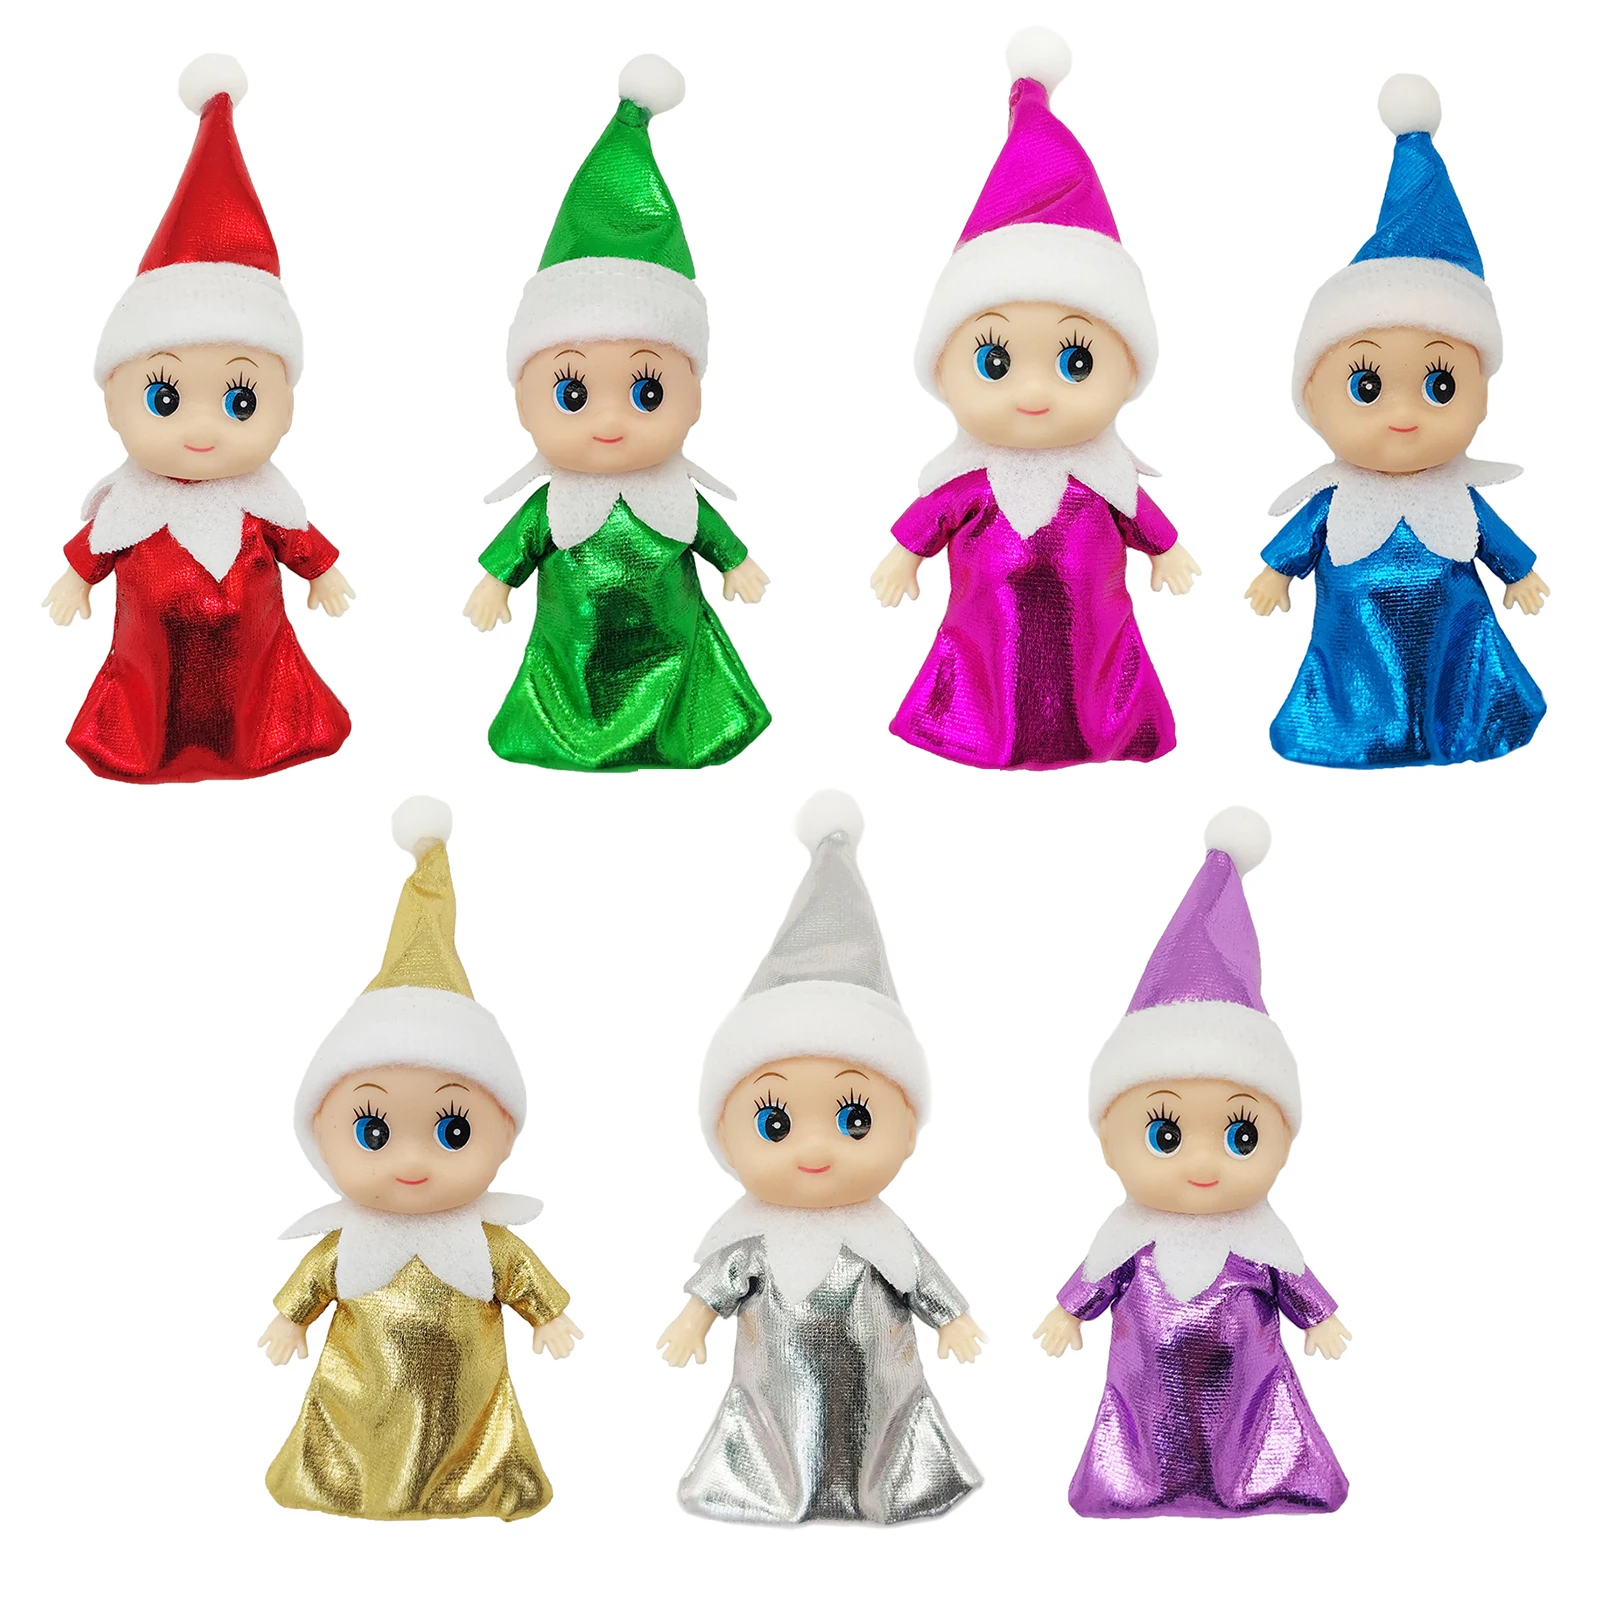 Mini Baby Elf Dolls Todder Shining Kindness Sleeping Bag Craft Babies Doll Toy Decoration On The Shelf Gift for Girl Boy Kid diy wooden book nook shelf insert kits miniature books library saint church bookends doll houses bookshelf handmade crafts gifts